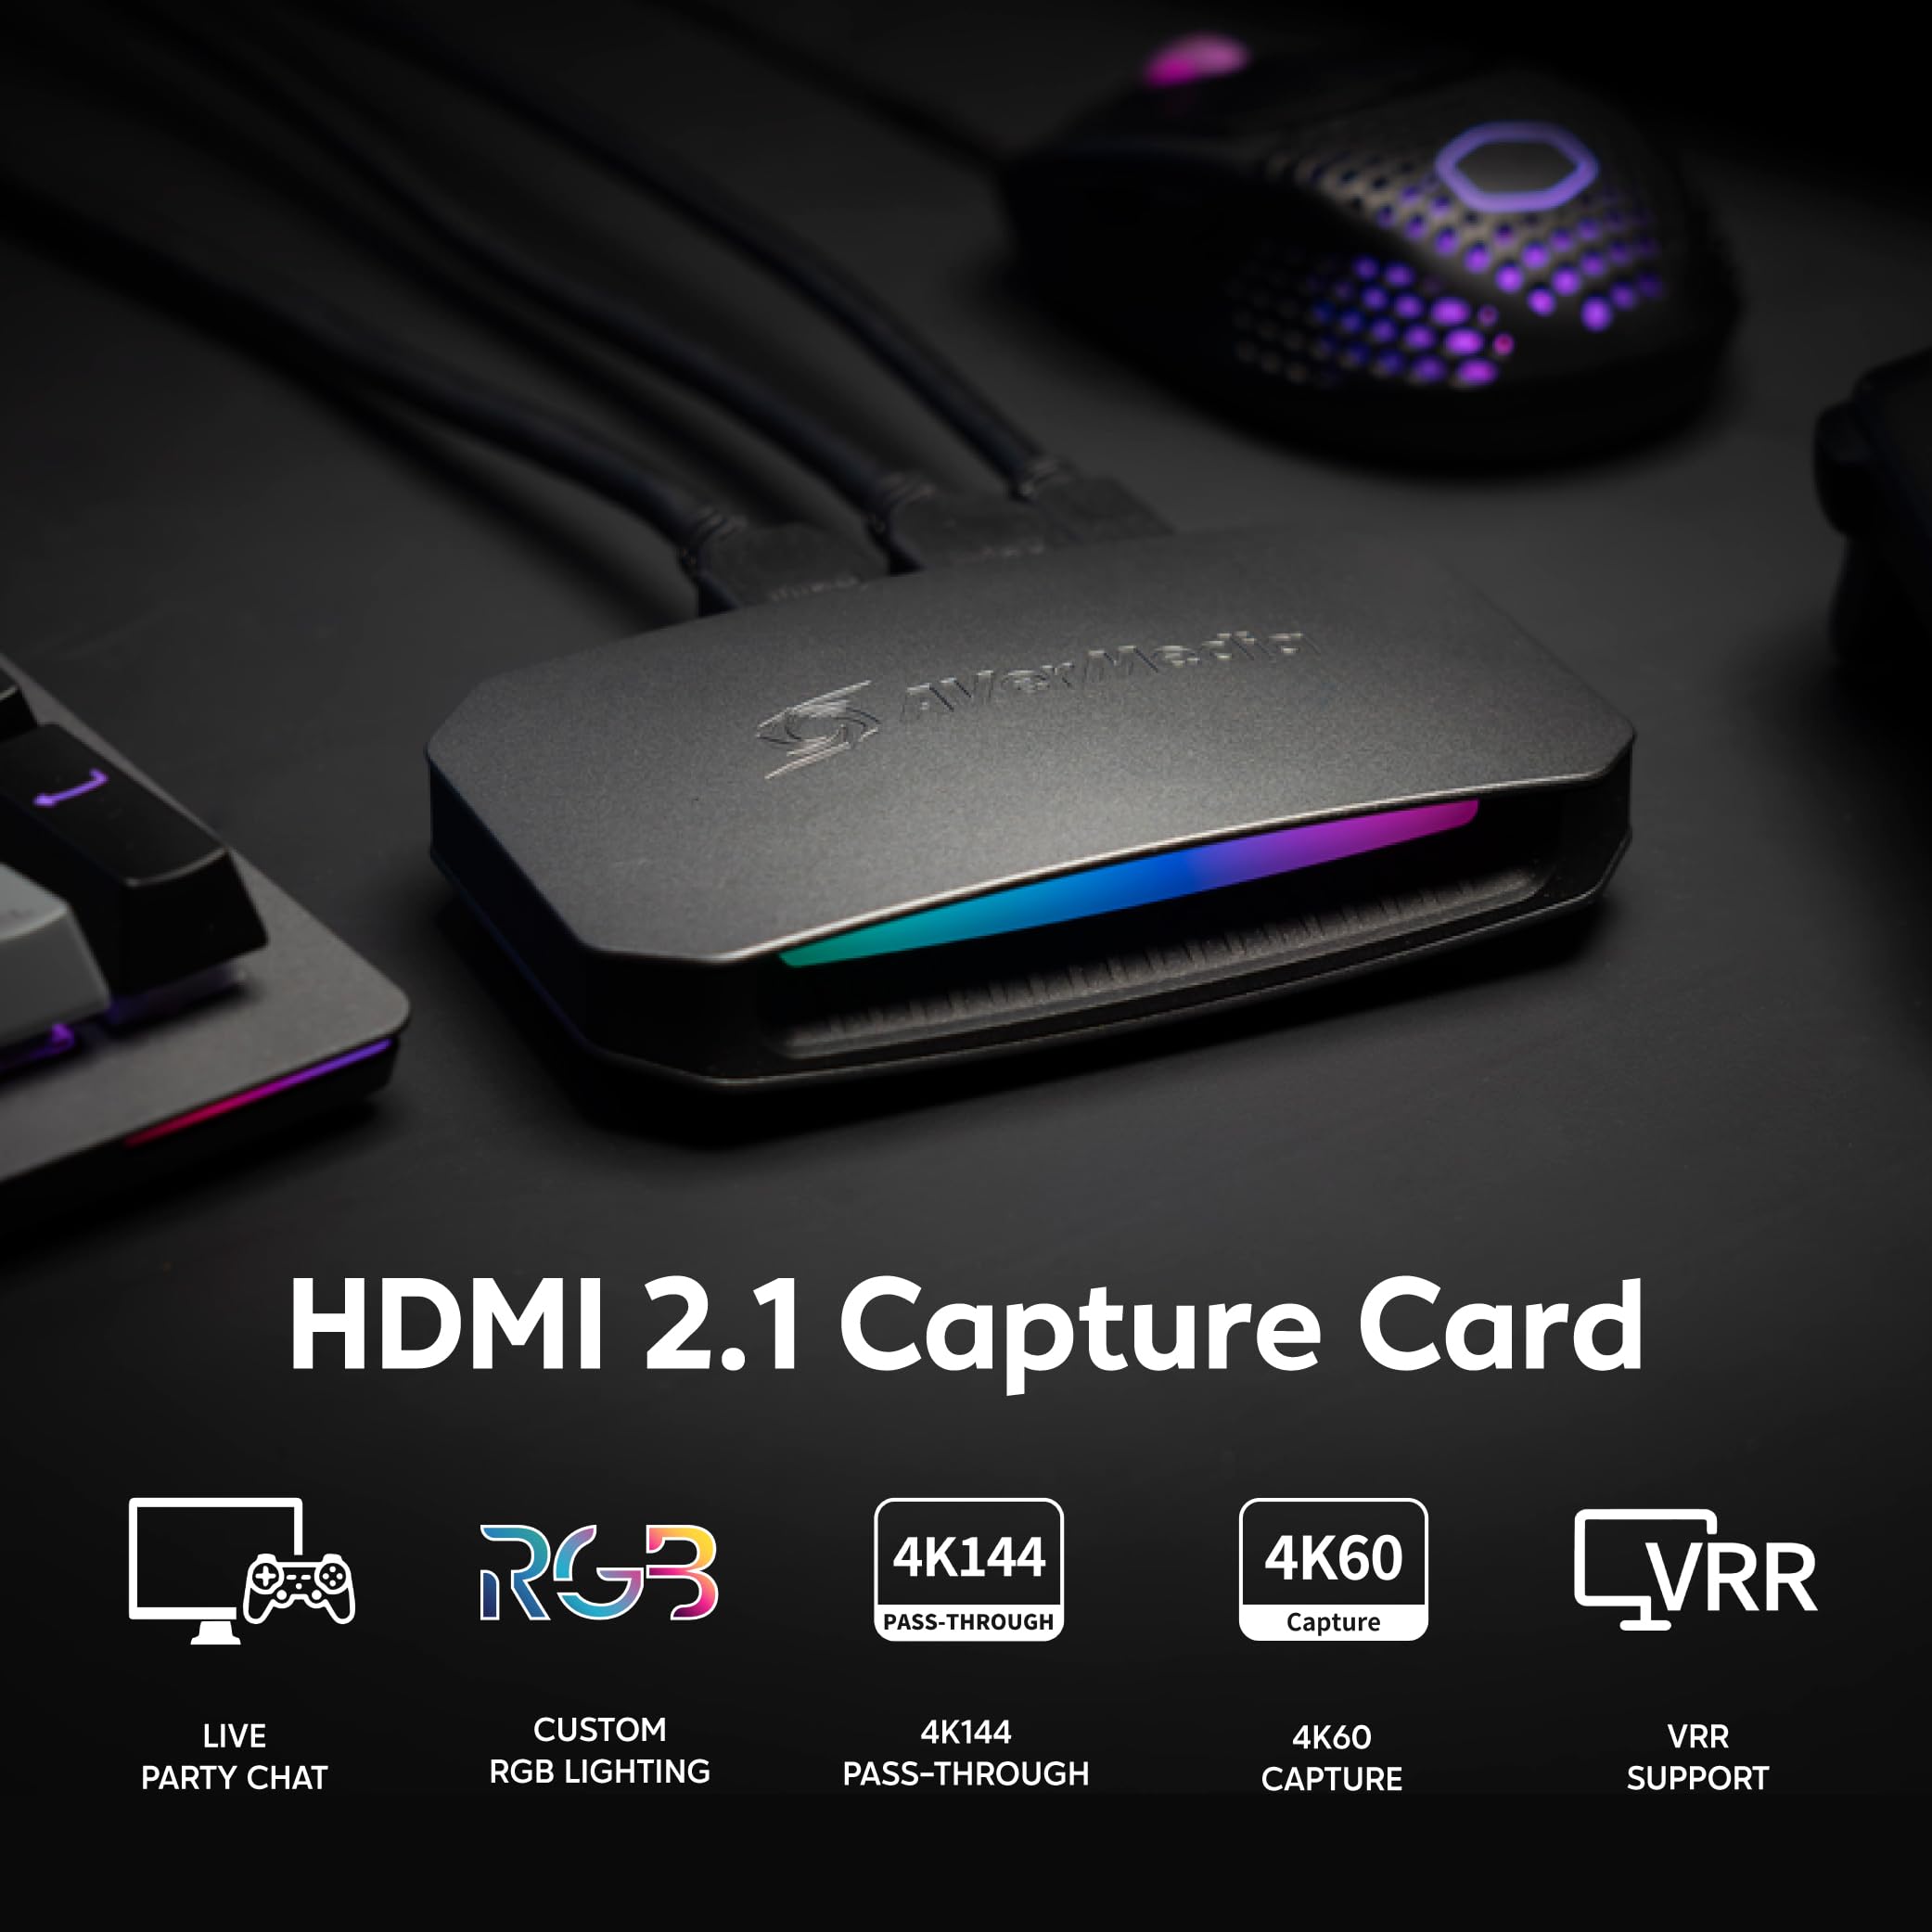 AVerMedia HDMI Capture Card 2.1 for Streaming and Gaming, VRR Support and HDR 4K Capture Card for Xbox Series x/s, PS5, Xbox One, PS4, Nintendo Switch-GC553G2 Live Gamer Ultra 2.1